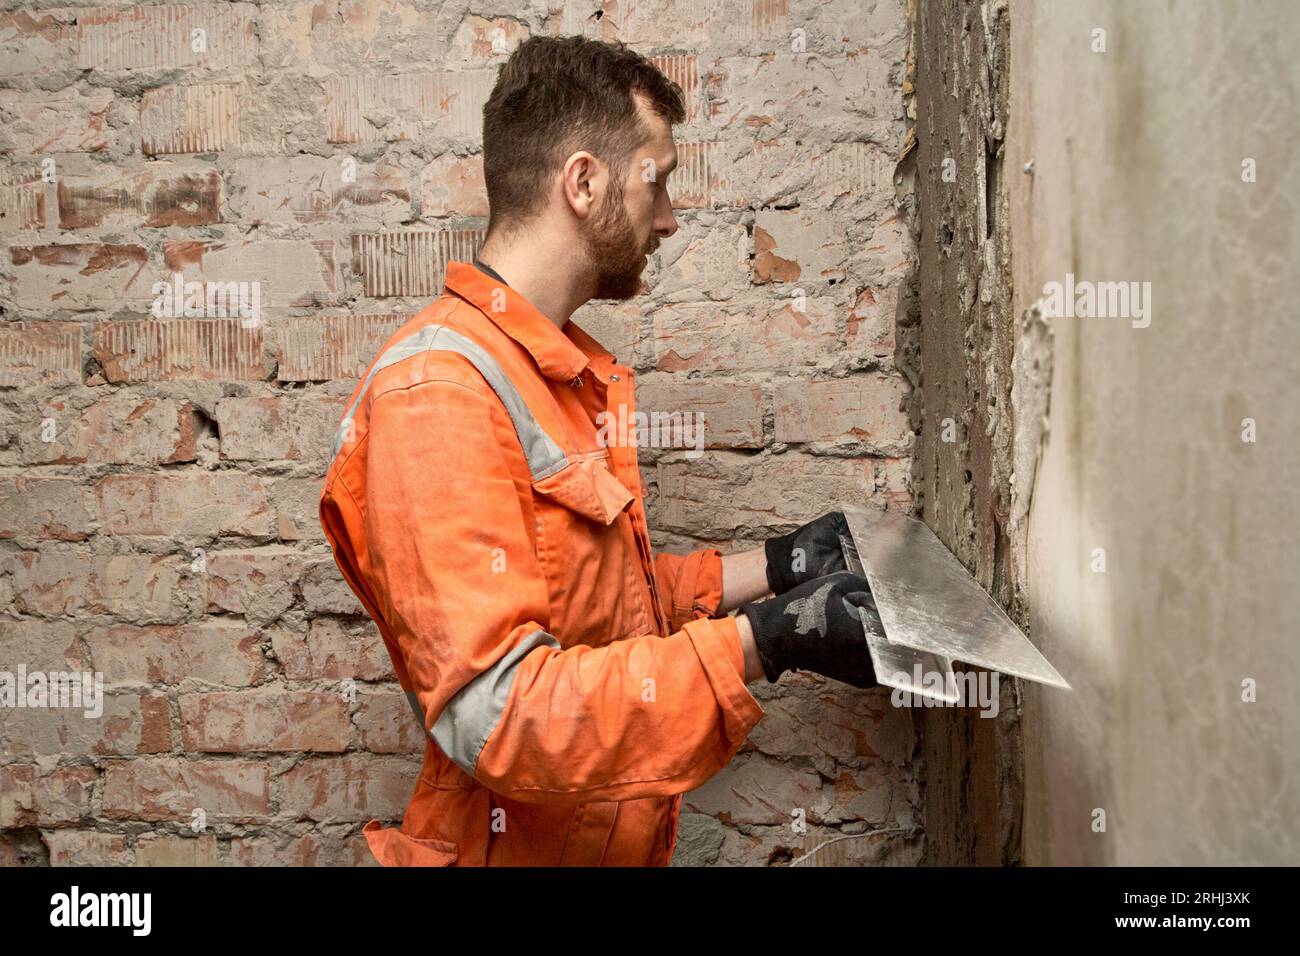 Man builder using h shape rule for plastering brick wall indoors. Stock Photo